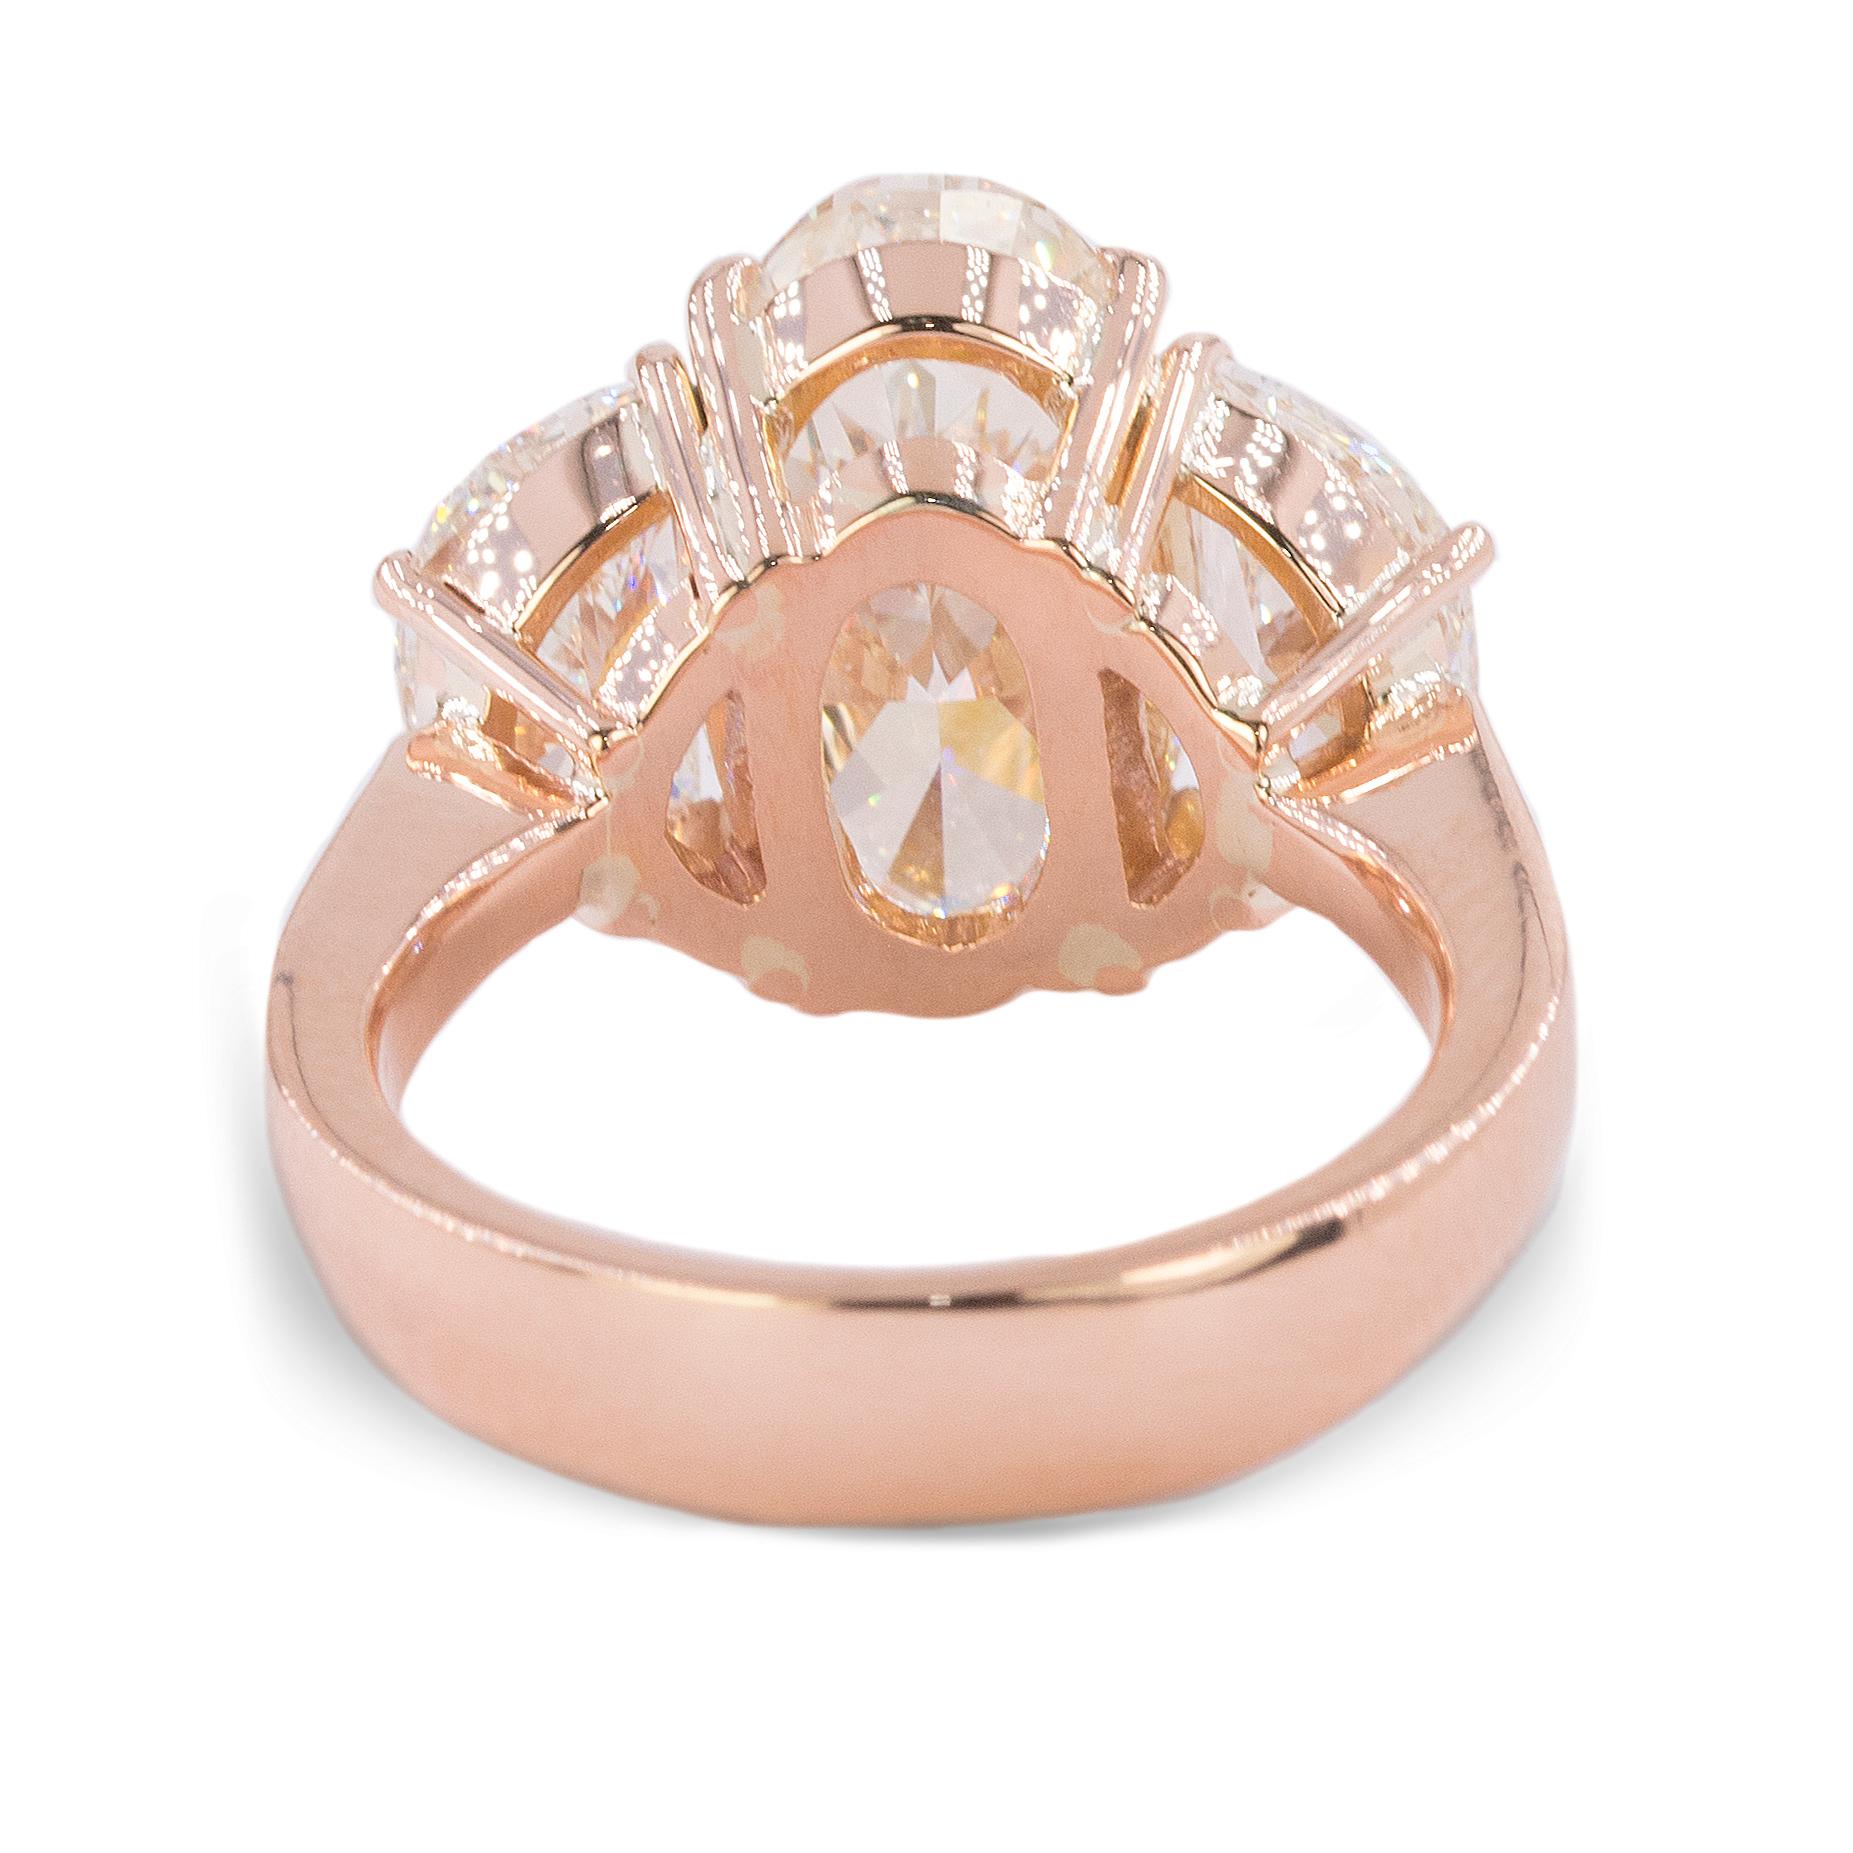 Oval Cut Magnificent 18k Rose Gold 6.73 Total Weight Diamond Ring